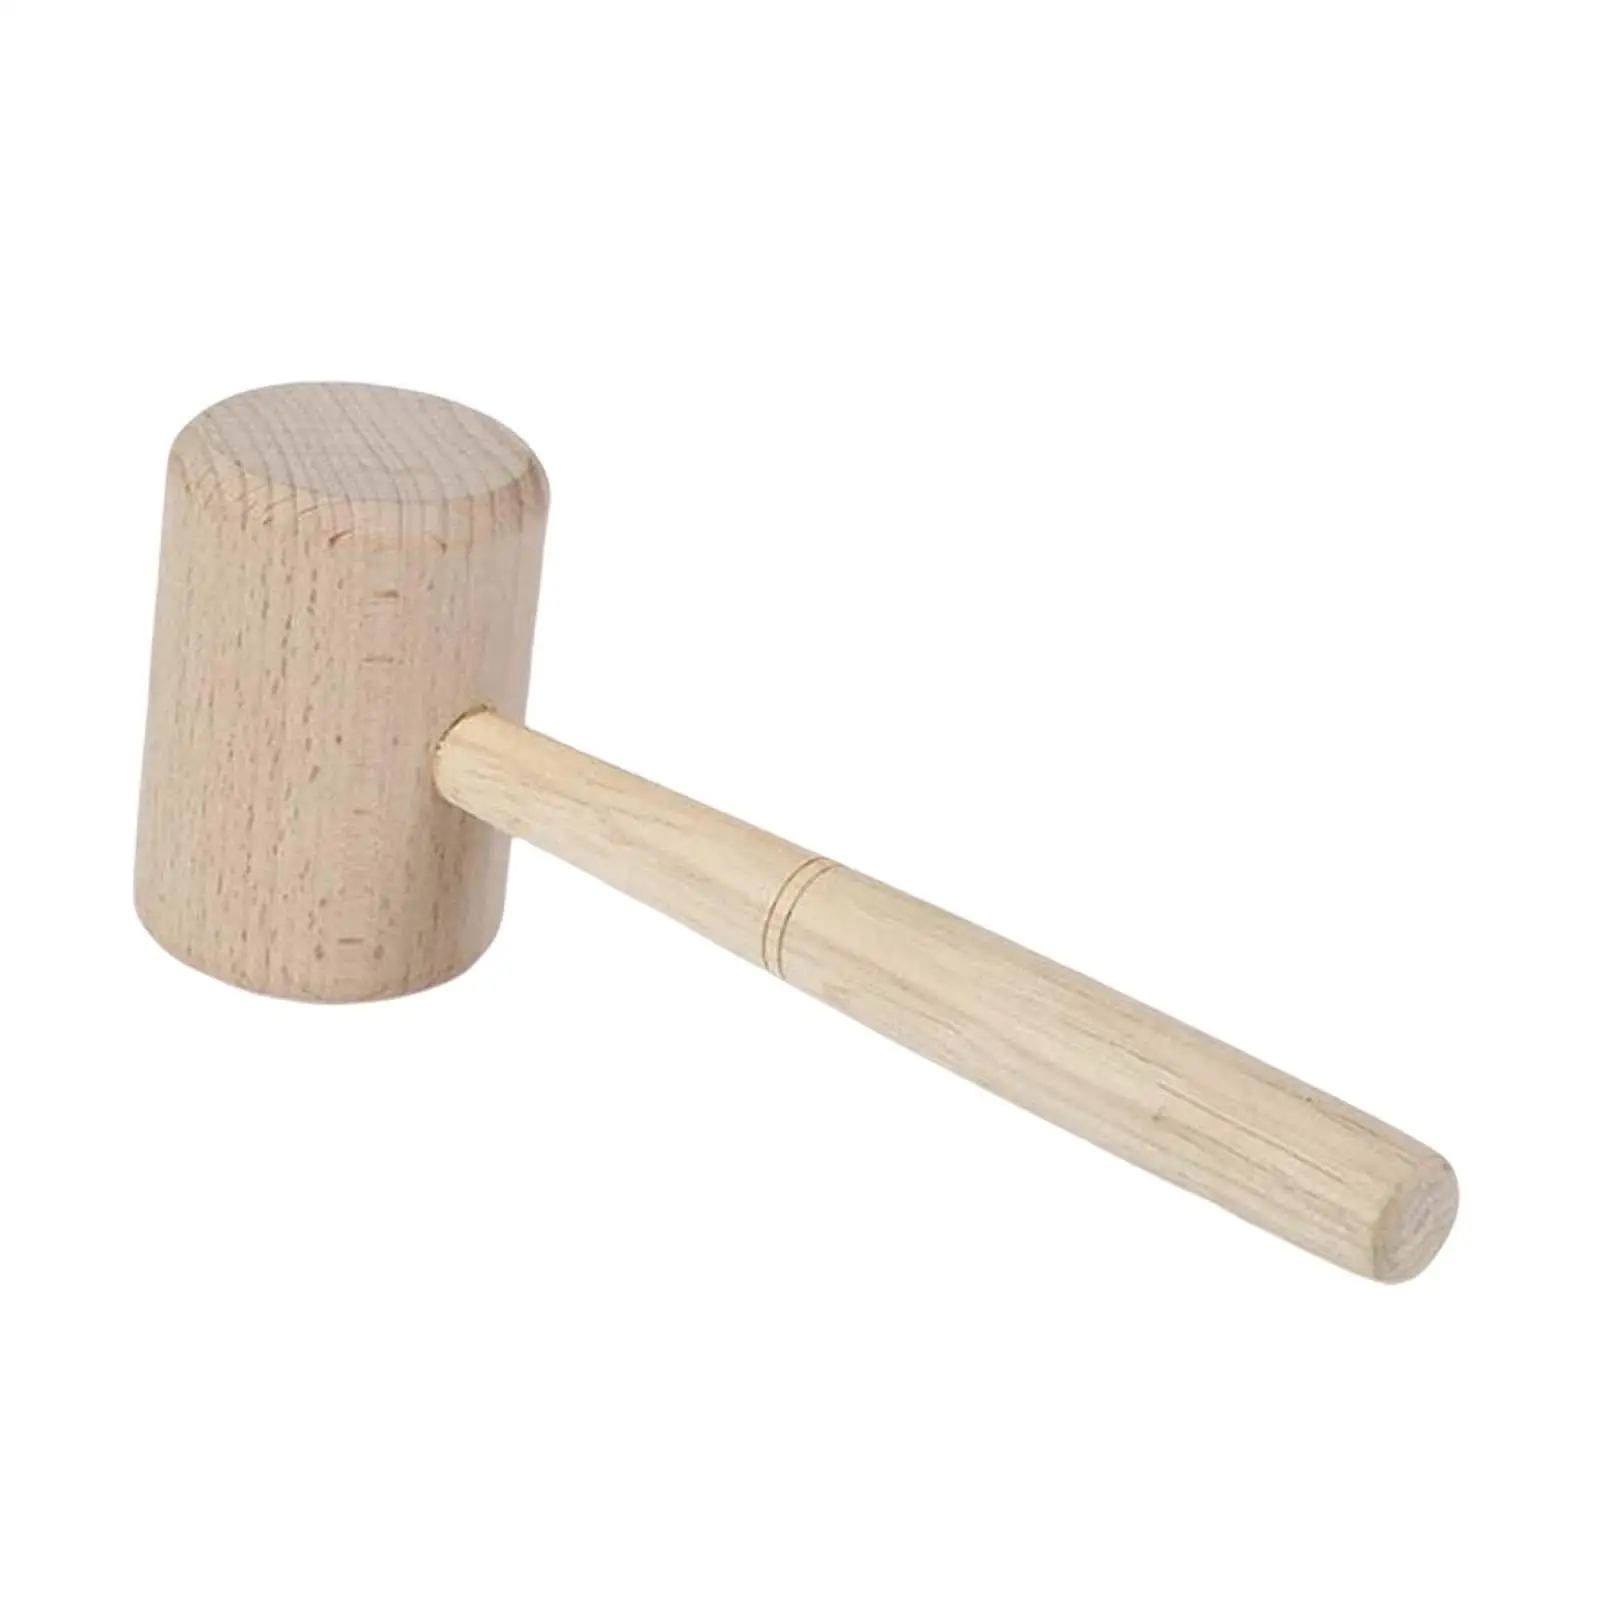 Beech Solid Wood Mallet Professional Woodworking Hammer Hand Hammer Accessory Vintage Wooden Mallet Wooden Hammer for Leather